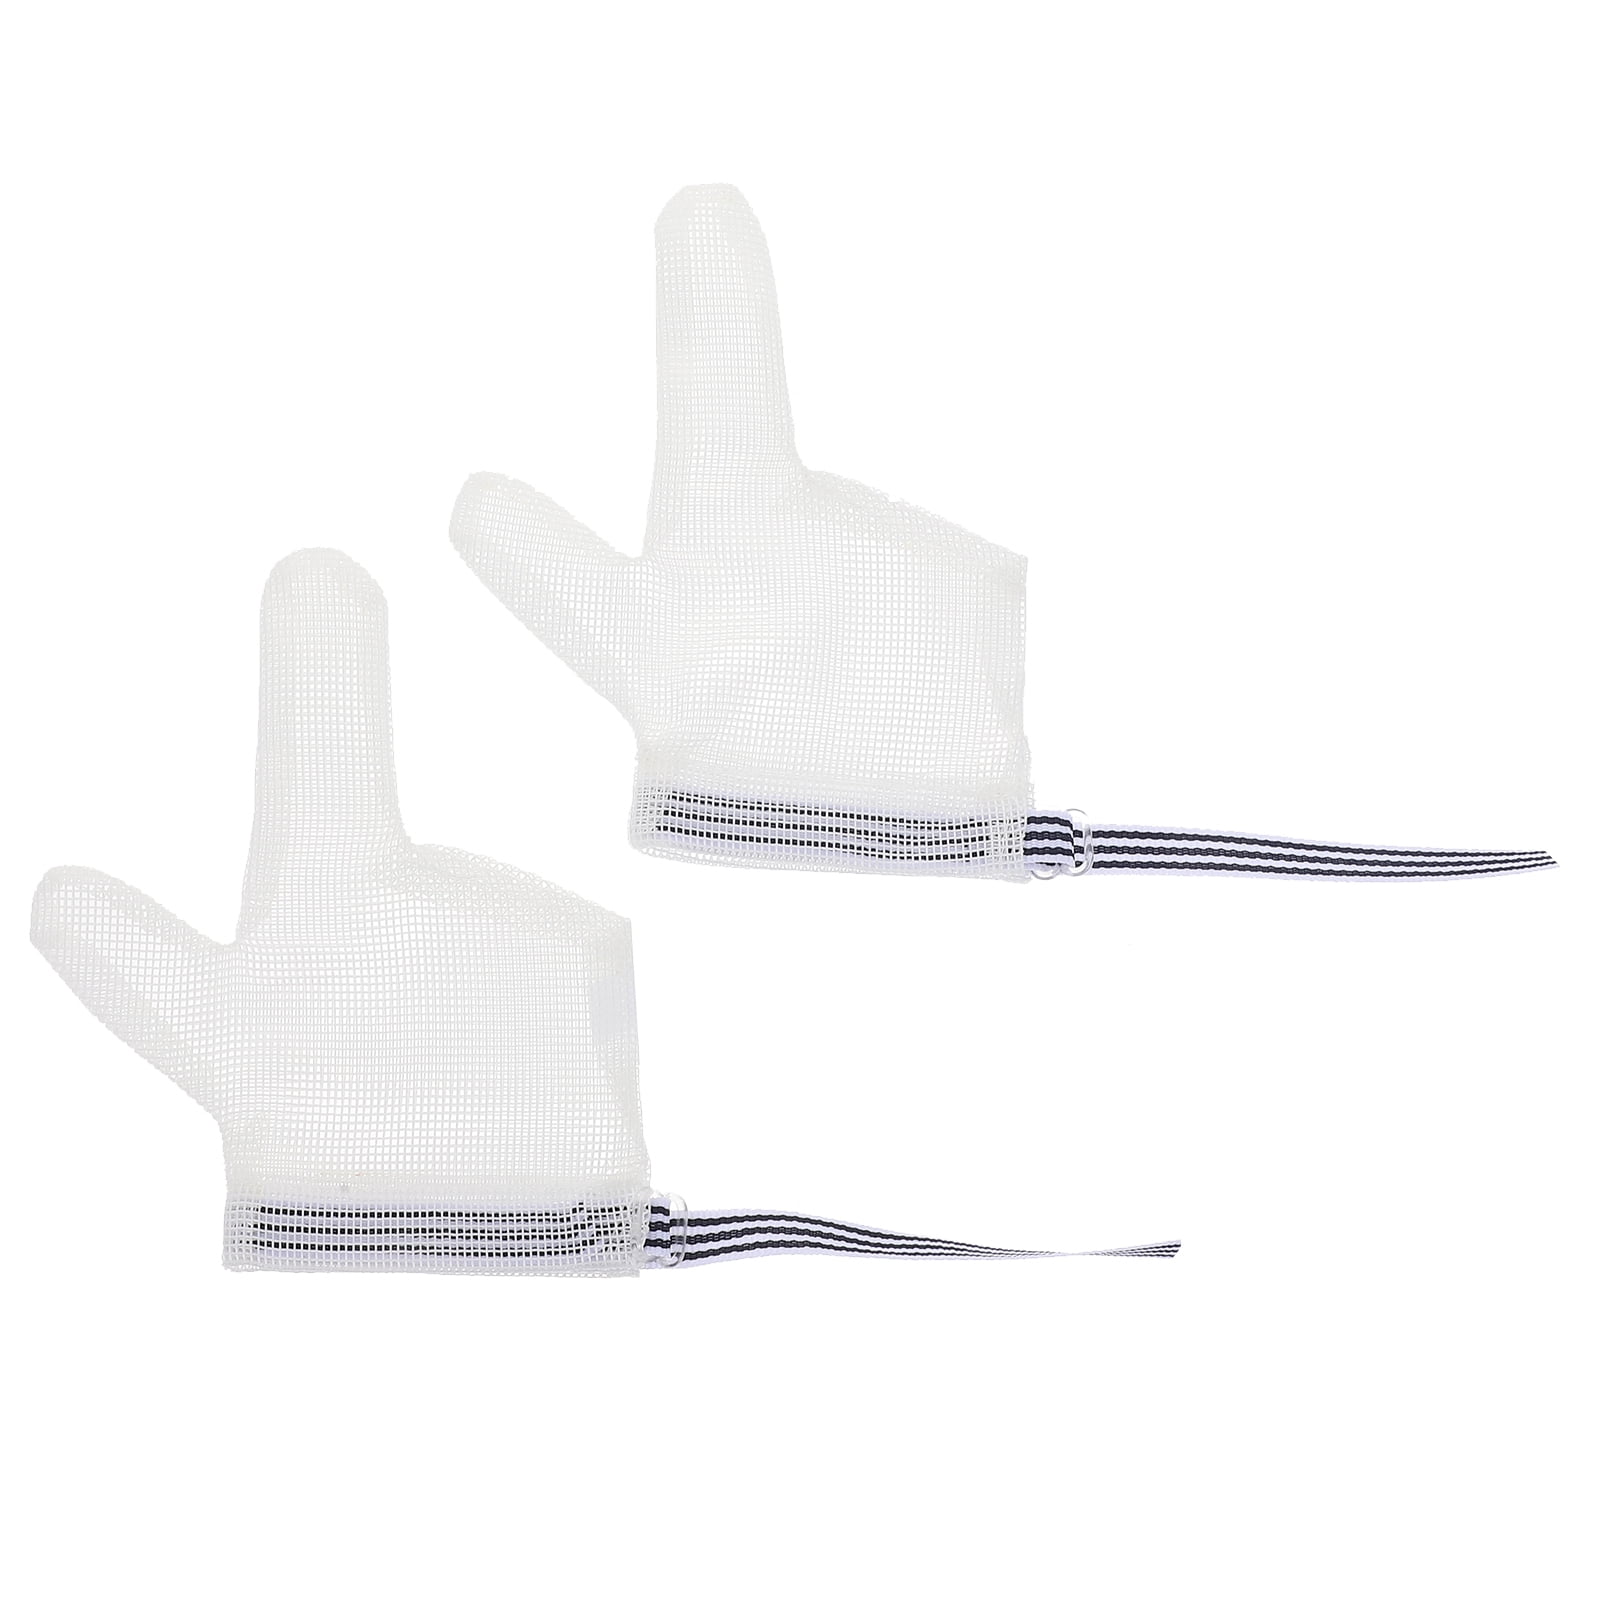 Pullers Pickers Biters Gloves™ | 450+ Favorites Under $10 | Pullers Pickers  Biters Gloves™ from Therapy Shoppe Sensory Tools for Hair Pullers, Skin  Pickers, Nail Biters | Trichotillomania | Dermatillomania